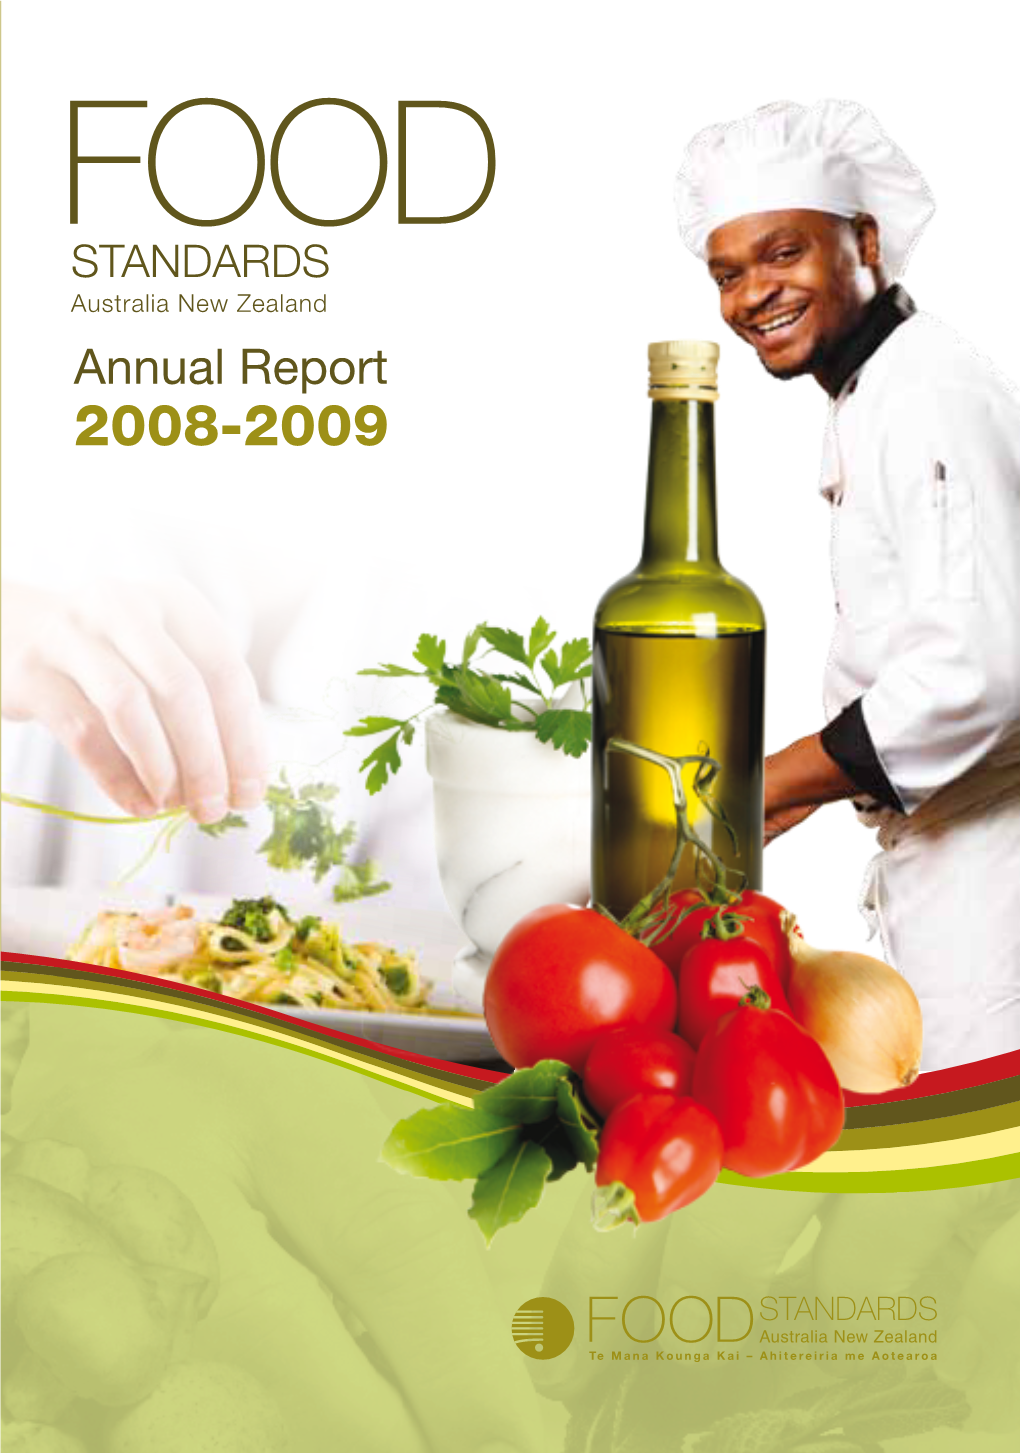 Annual Report 2008 - 2009 - 2008 Report Annual FOOD STANDARDS Australia New Zealand Annual Report 2008-2009